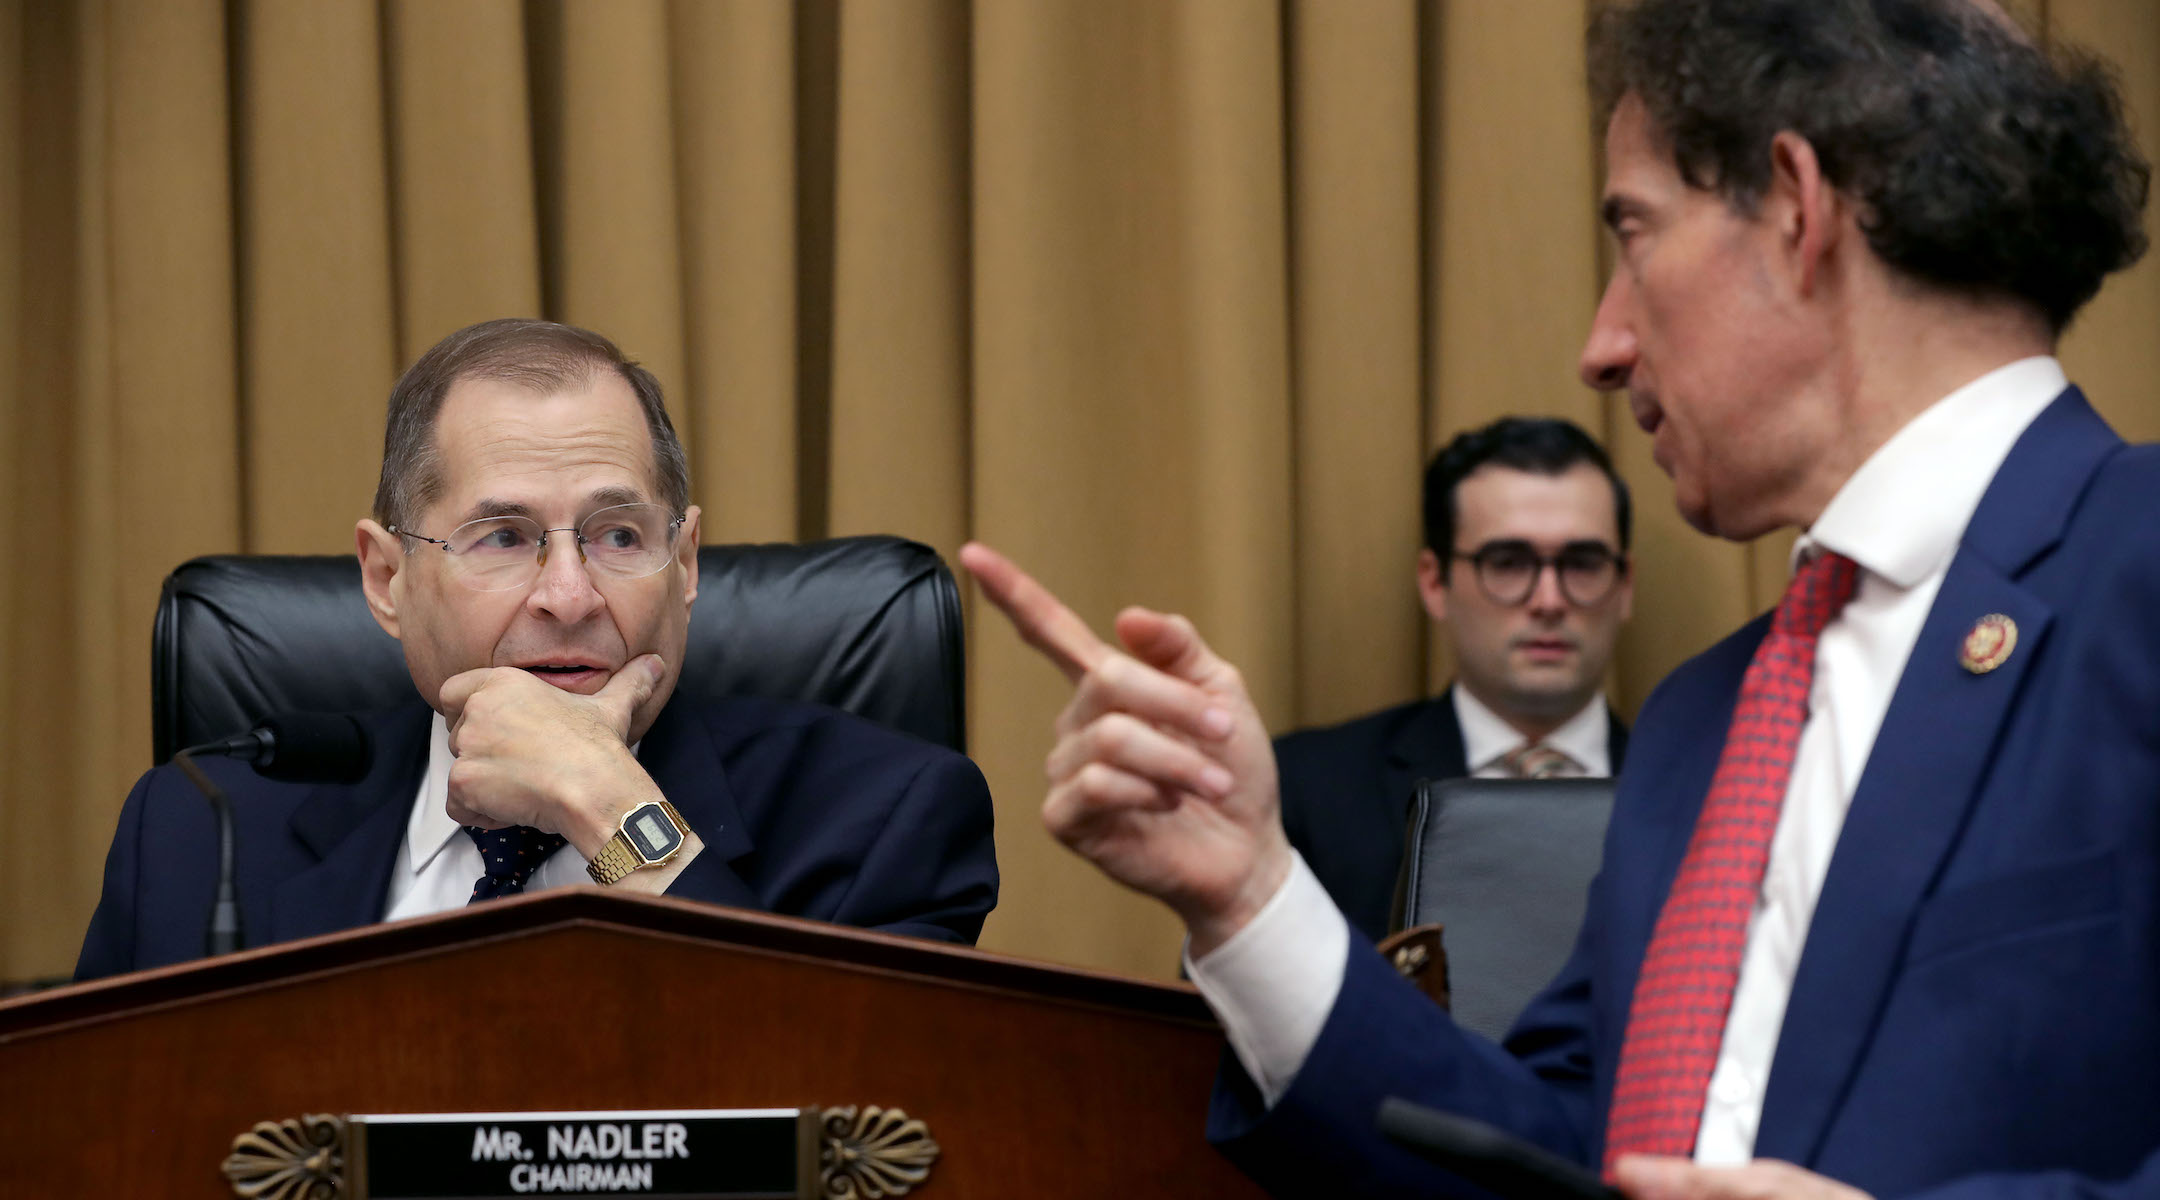 Rep. Jerry Nadler, seated, chairman of the House Judiciary Committee, and Rep. Jamie Raskin at a hearing on Capitol Hill, May 8, 2019. (Chip Somodevilla/Getty Images)